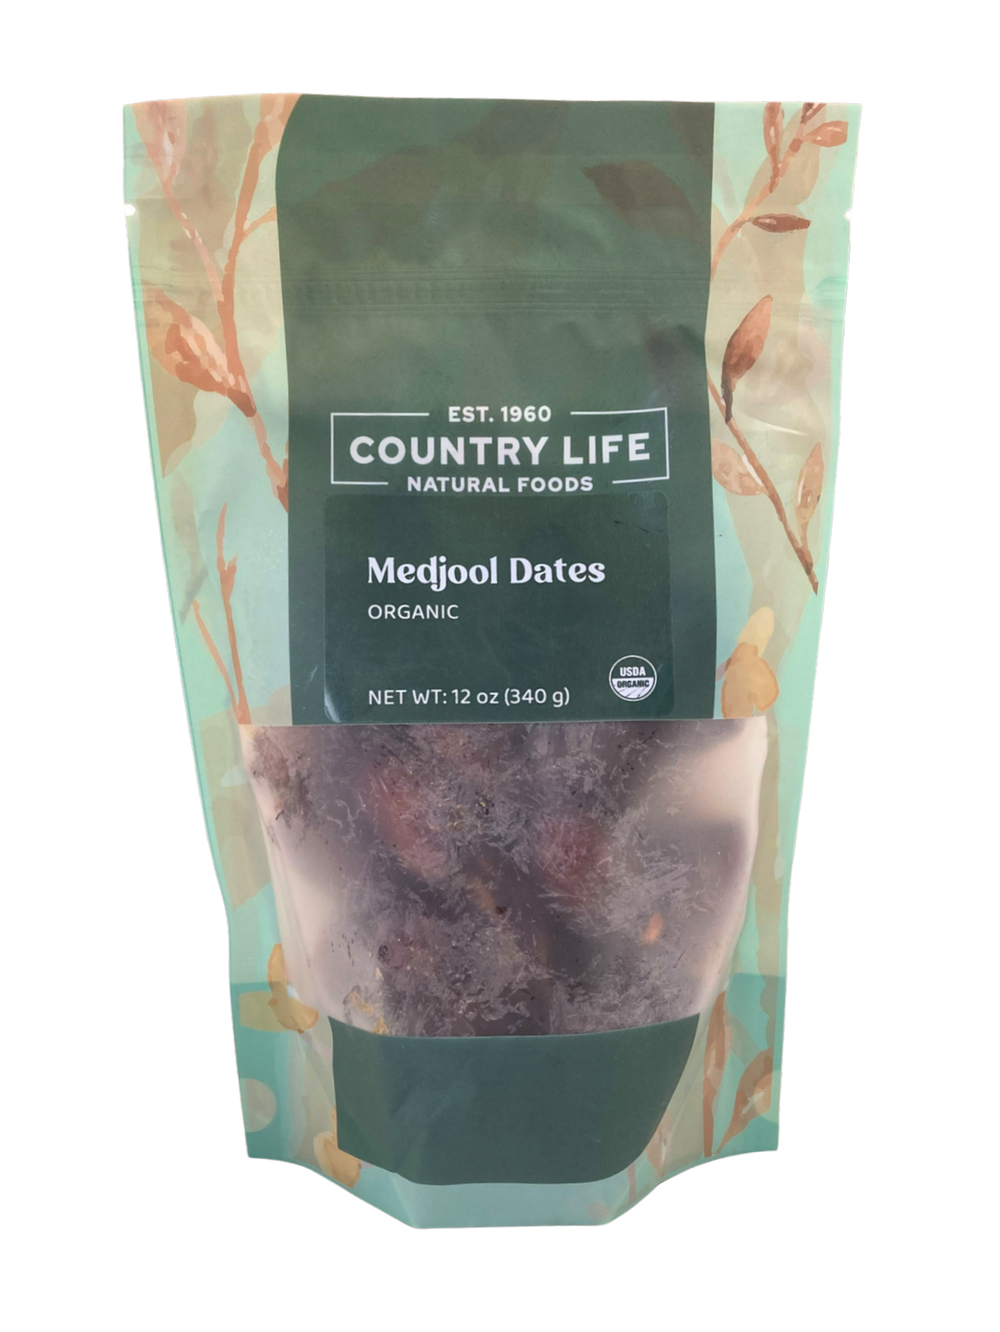 Organic Dates, Medjool, Choice, w/Pit - Country Life Natural Foods